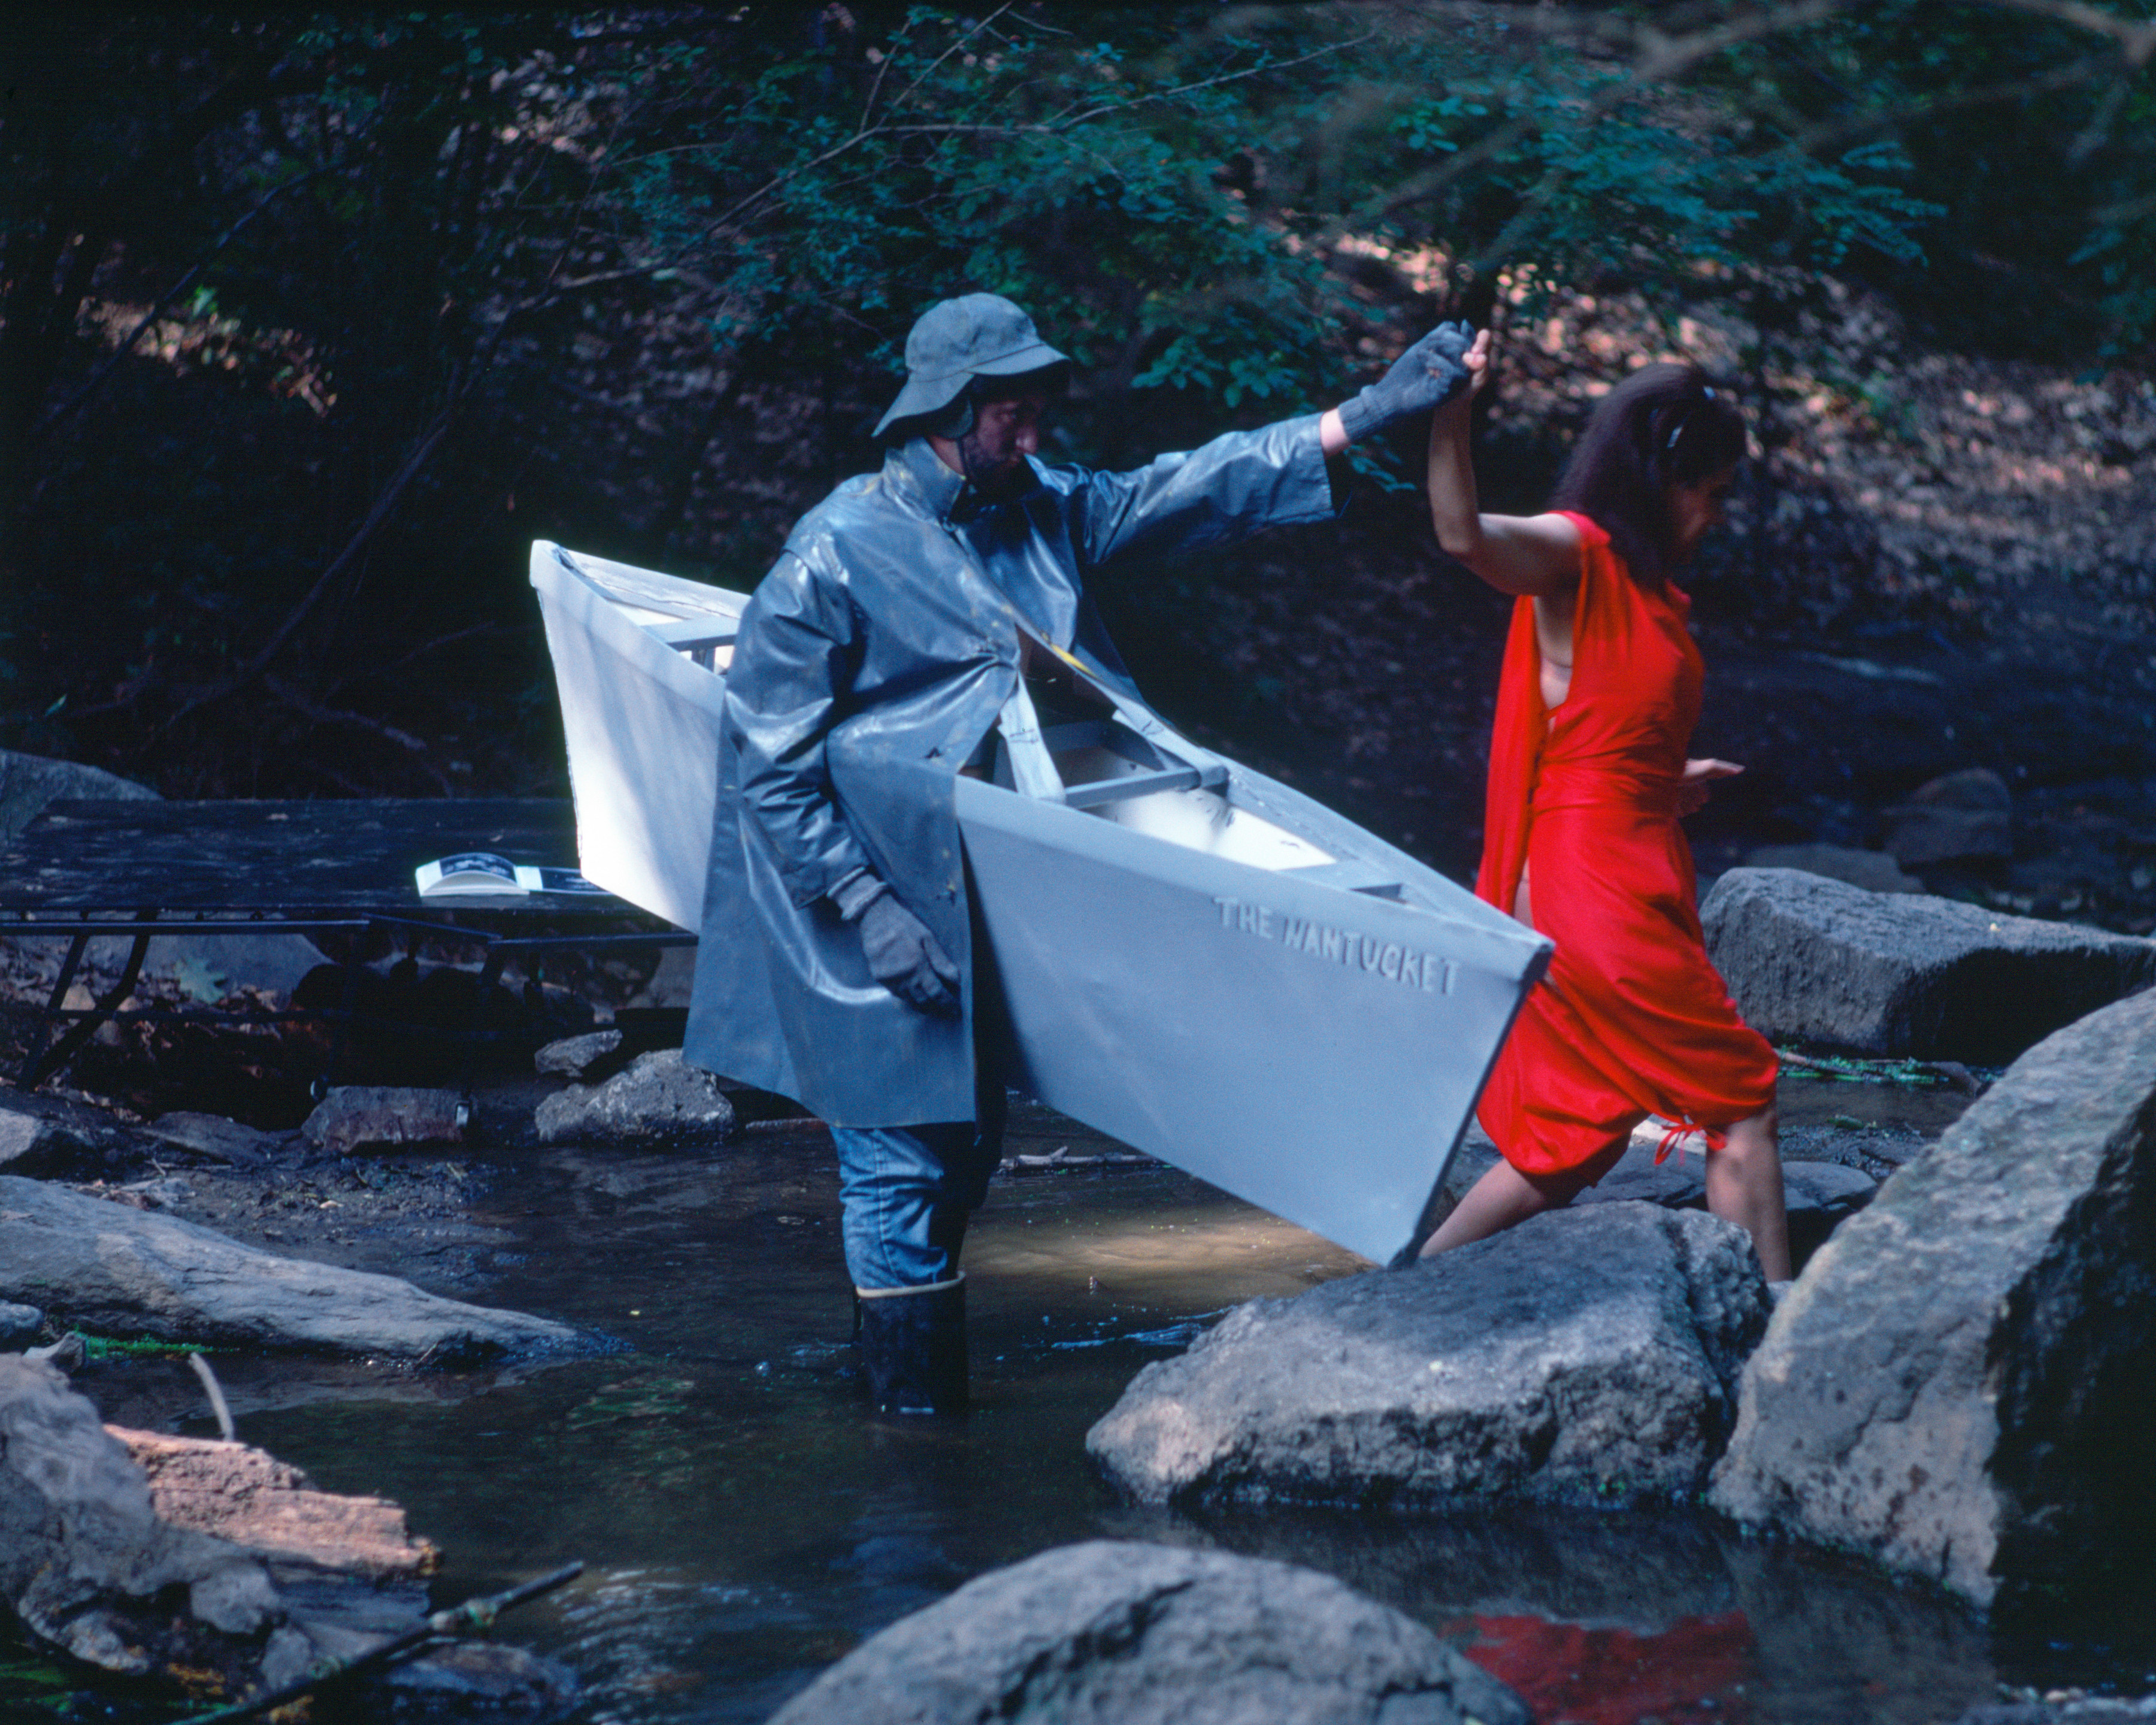 Rivers, First Draft: The Nantucket Memorial guides the Woman in Red to the other side of the stream, 1982/2015, Digital C-print from Kodachrome 35mm slides in 48 parts, 16h x 20w in (40.64h x 50.80w cm)